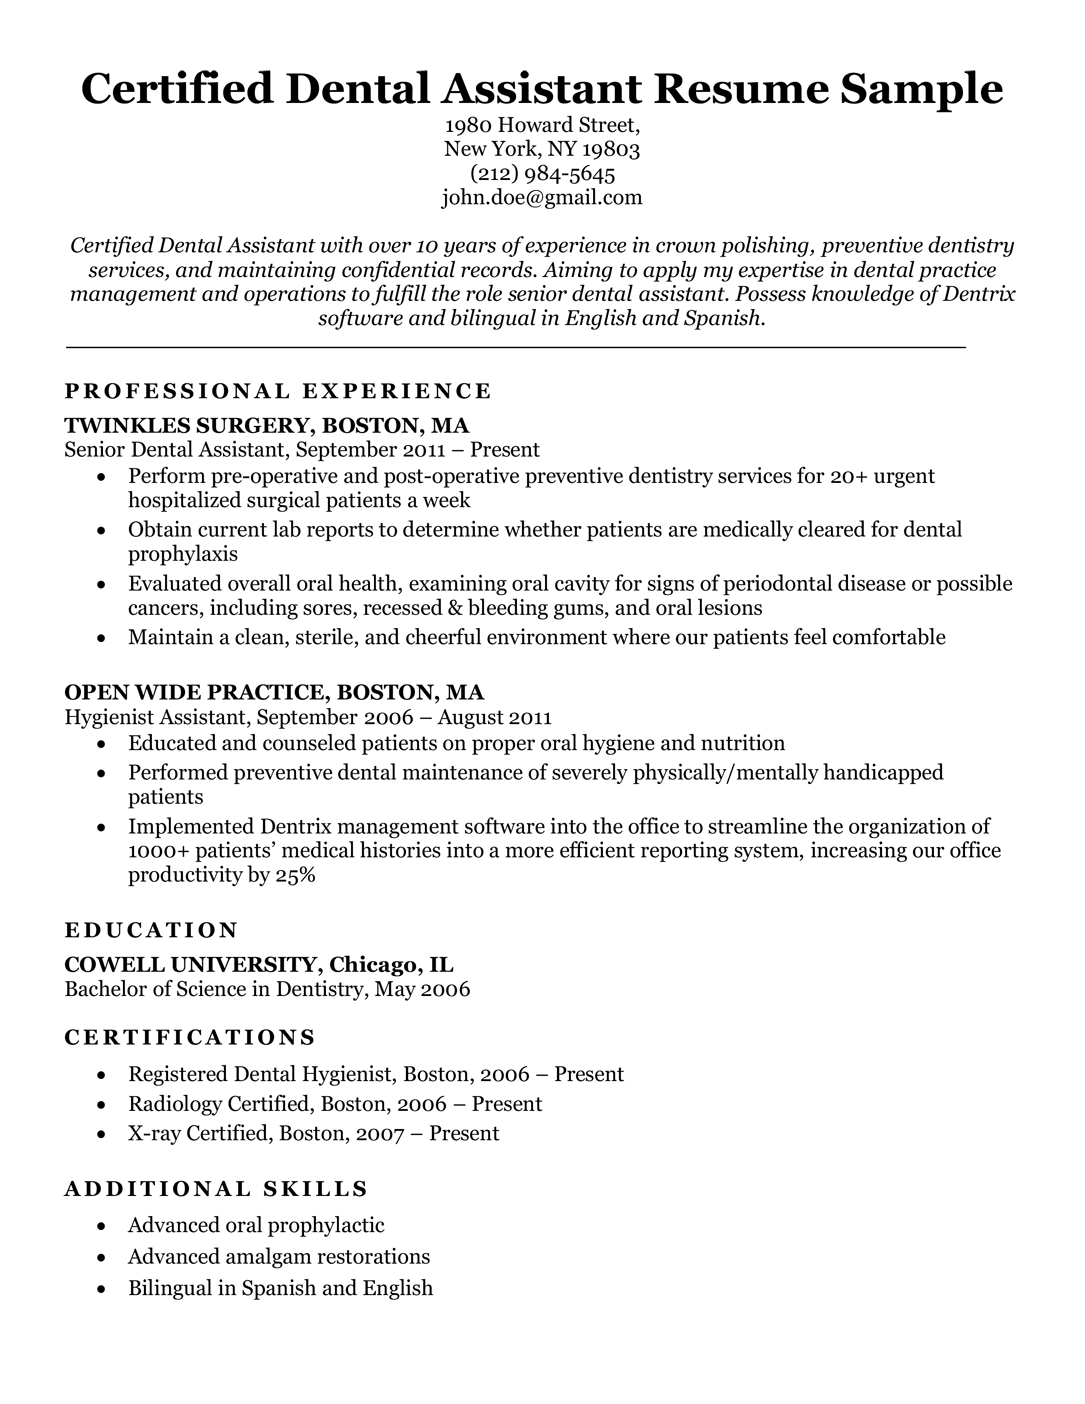 dental assistant resume examples